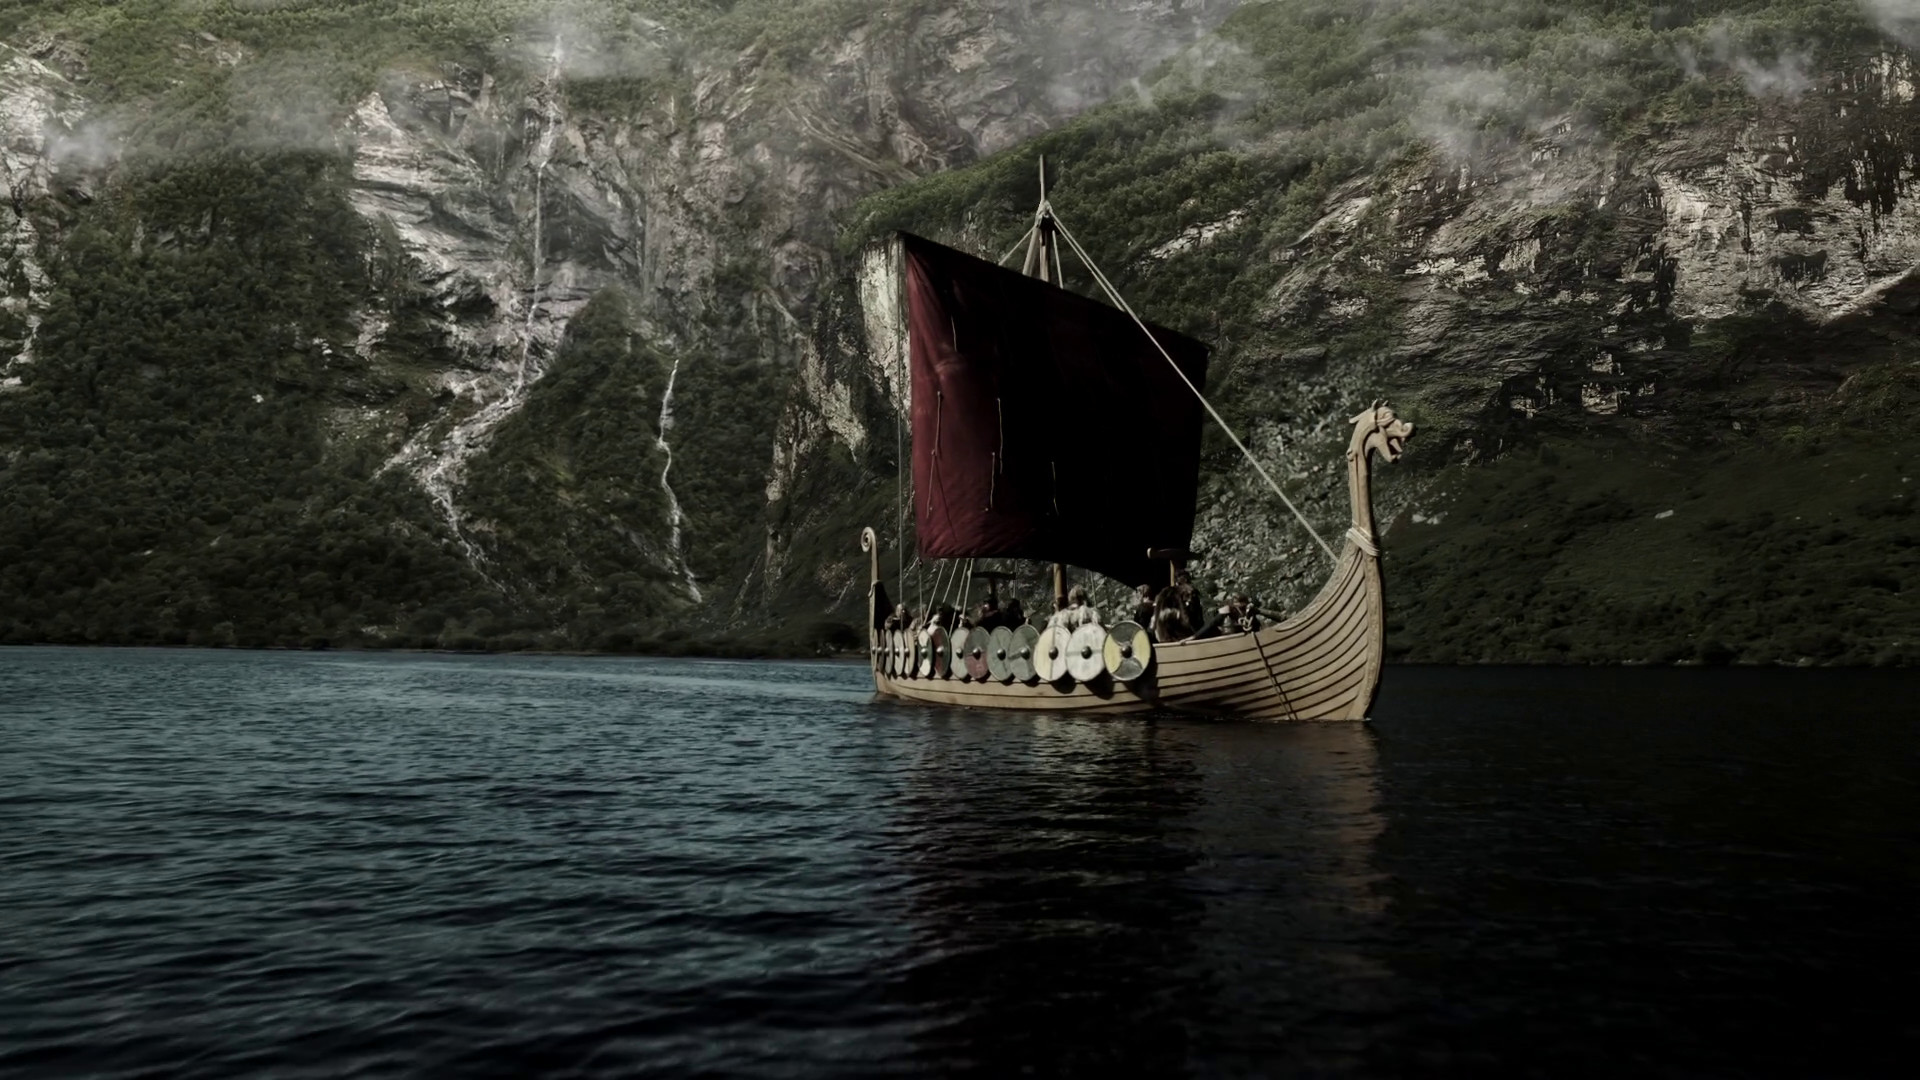 1920x1080 Red sail of a Viking ship wallpapers and images - wallpapers, pictures .